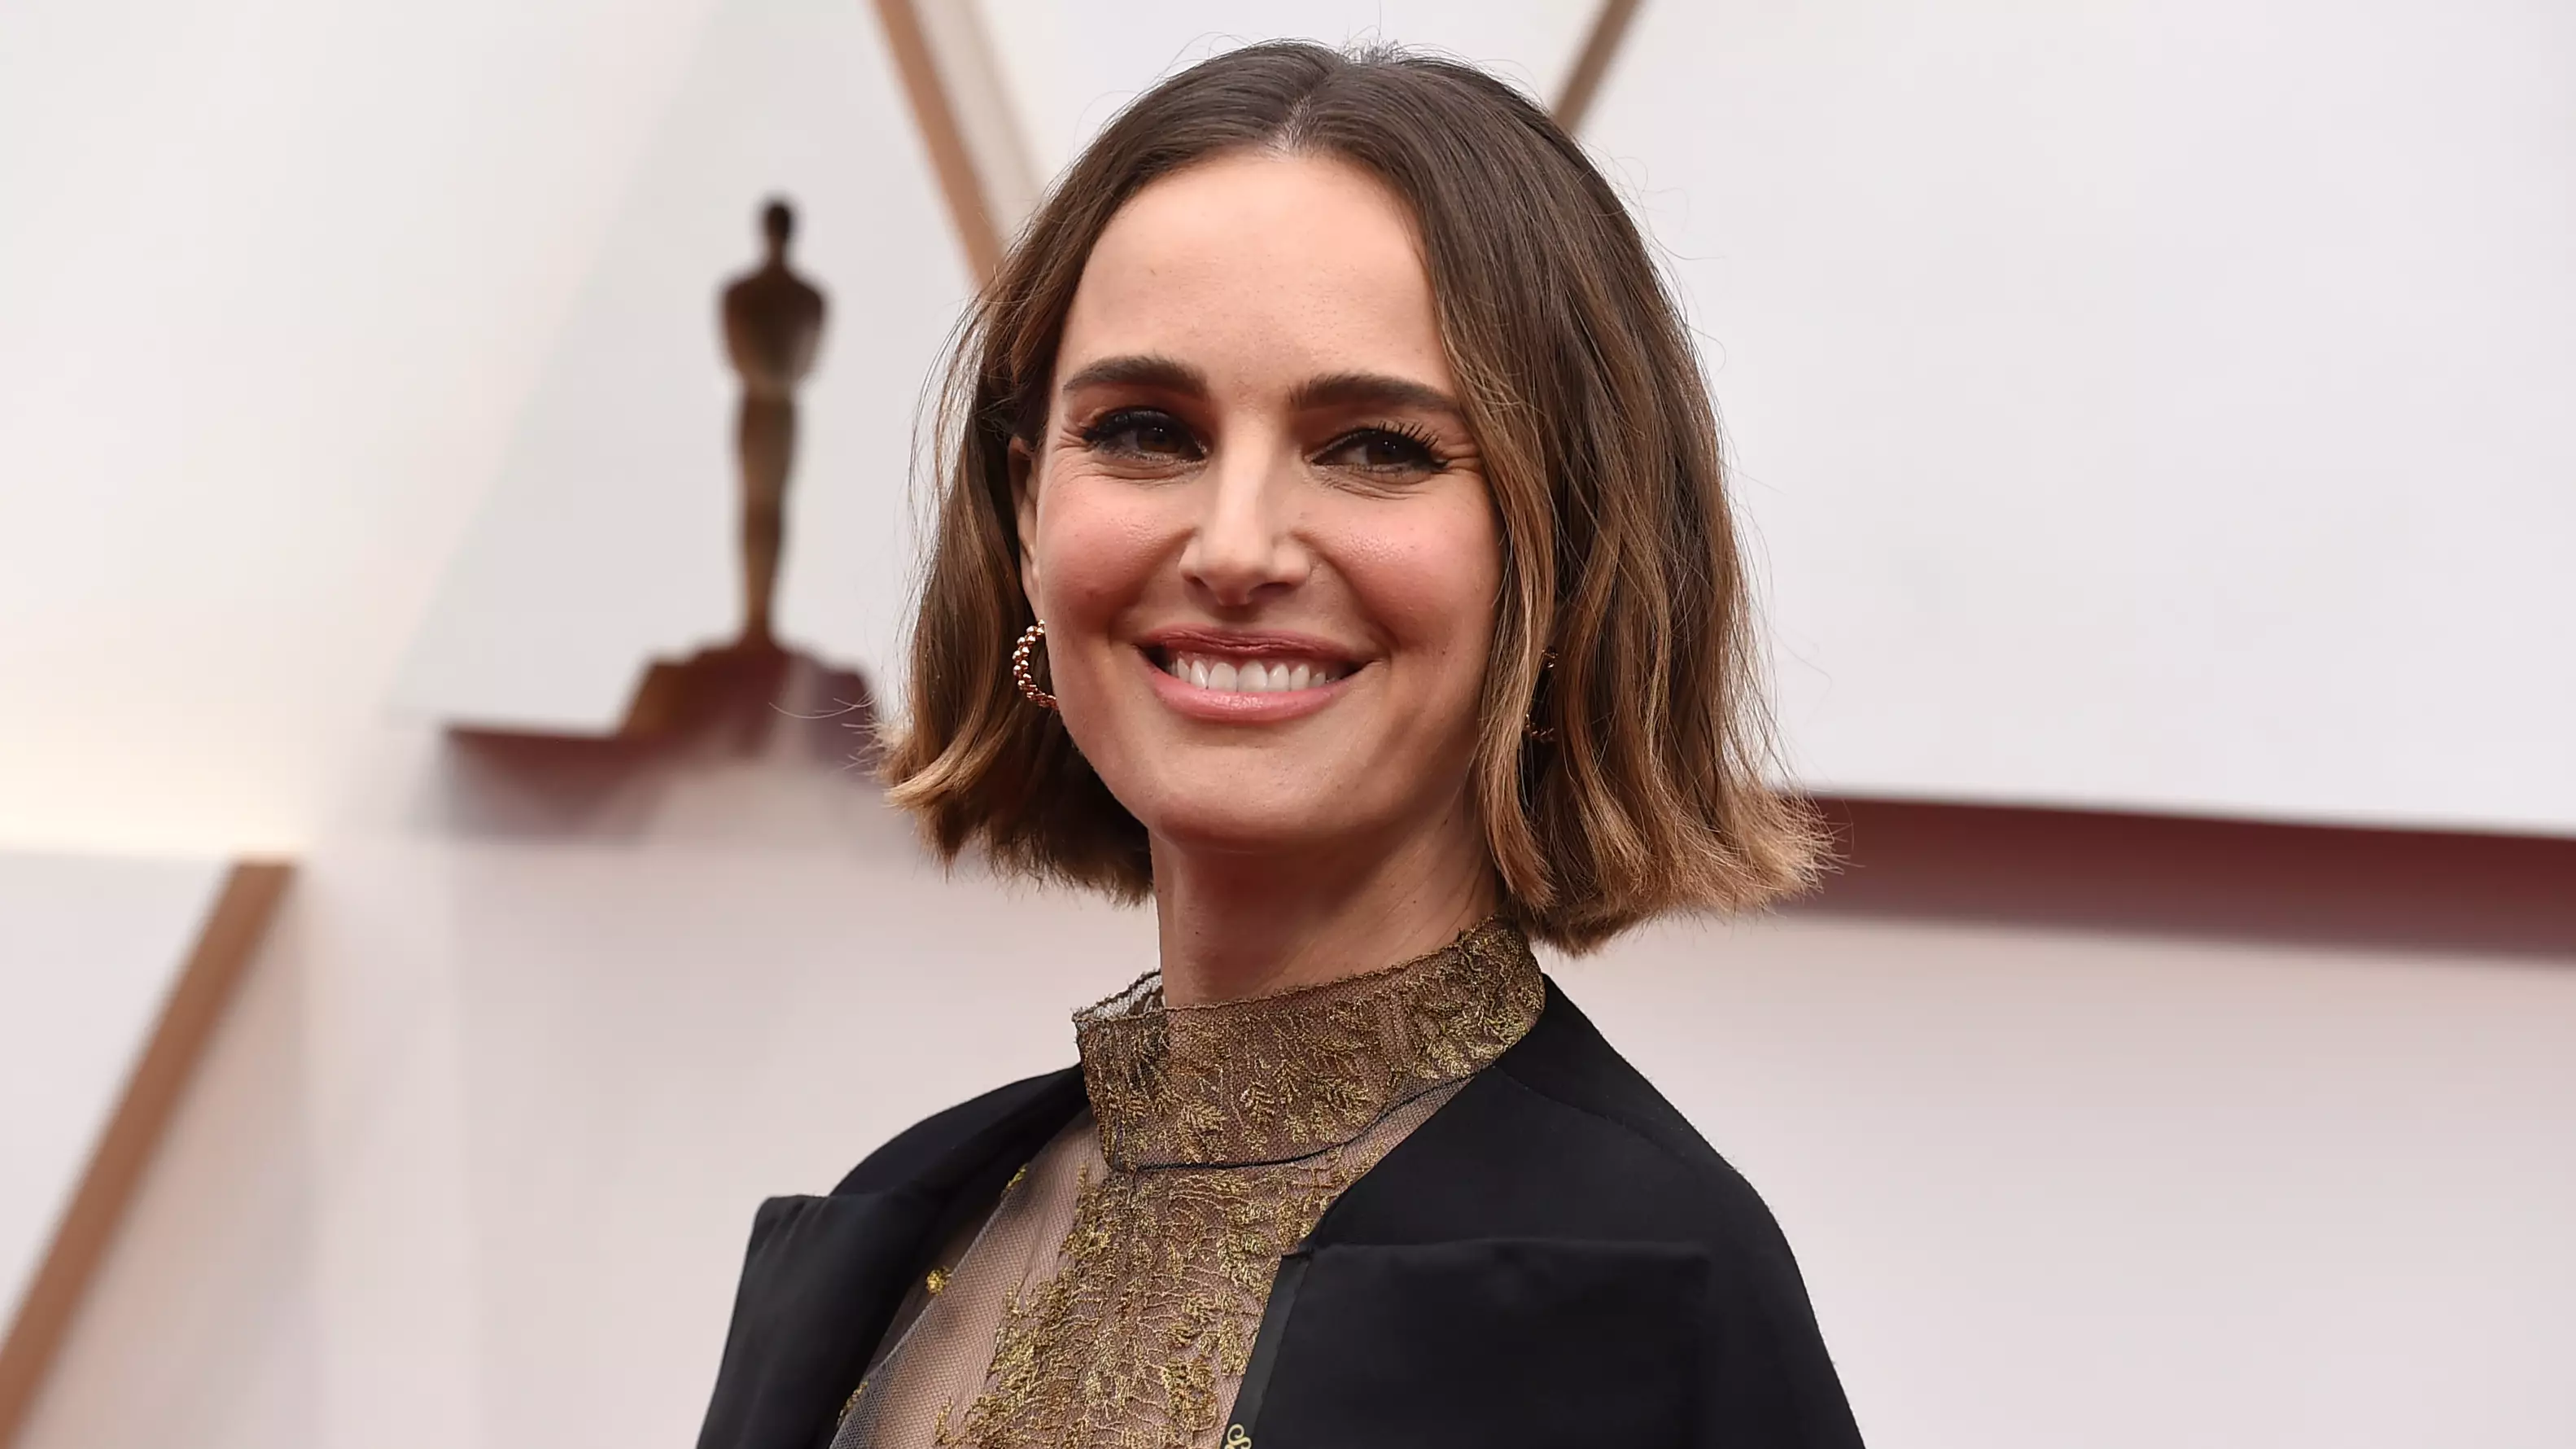 Natalie Portman Drags Oscars By Wearing Cape Embroidered With Names Of Snubbed Women